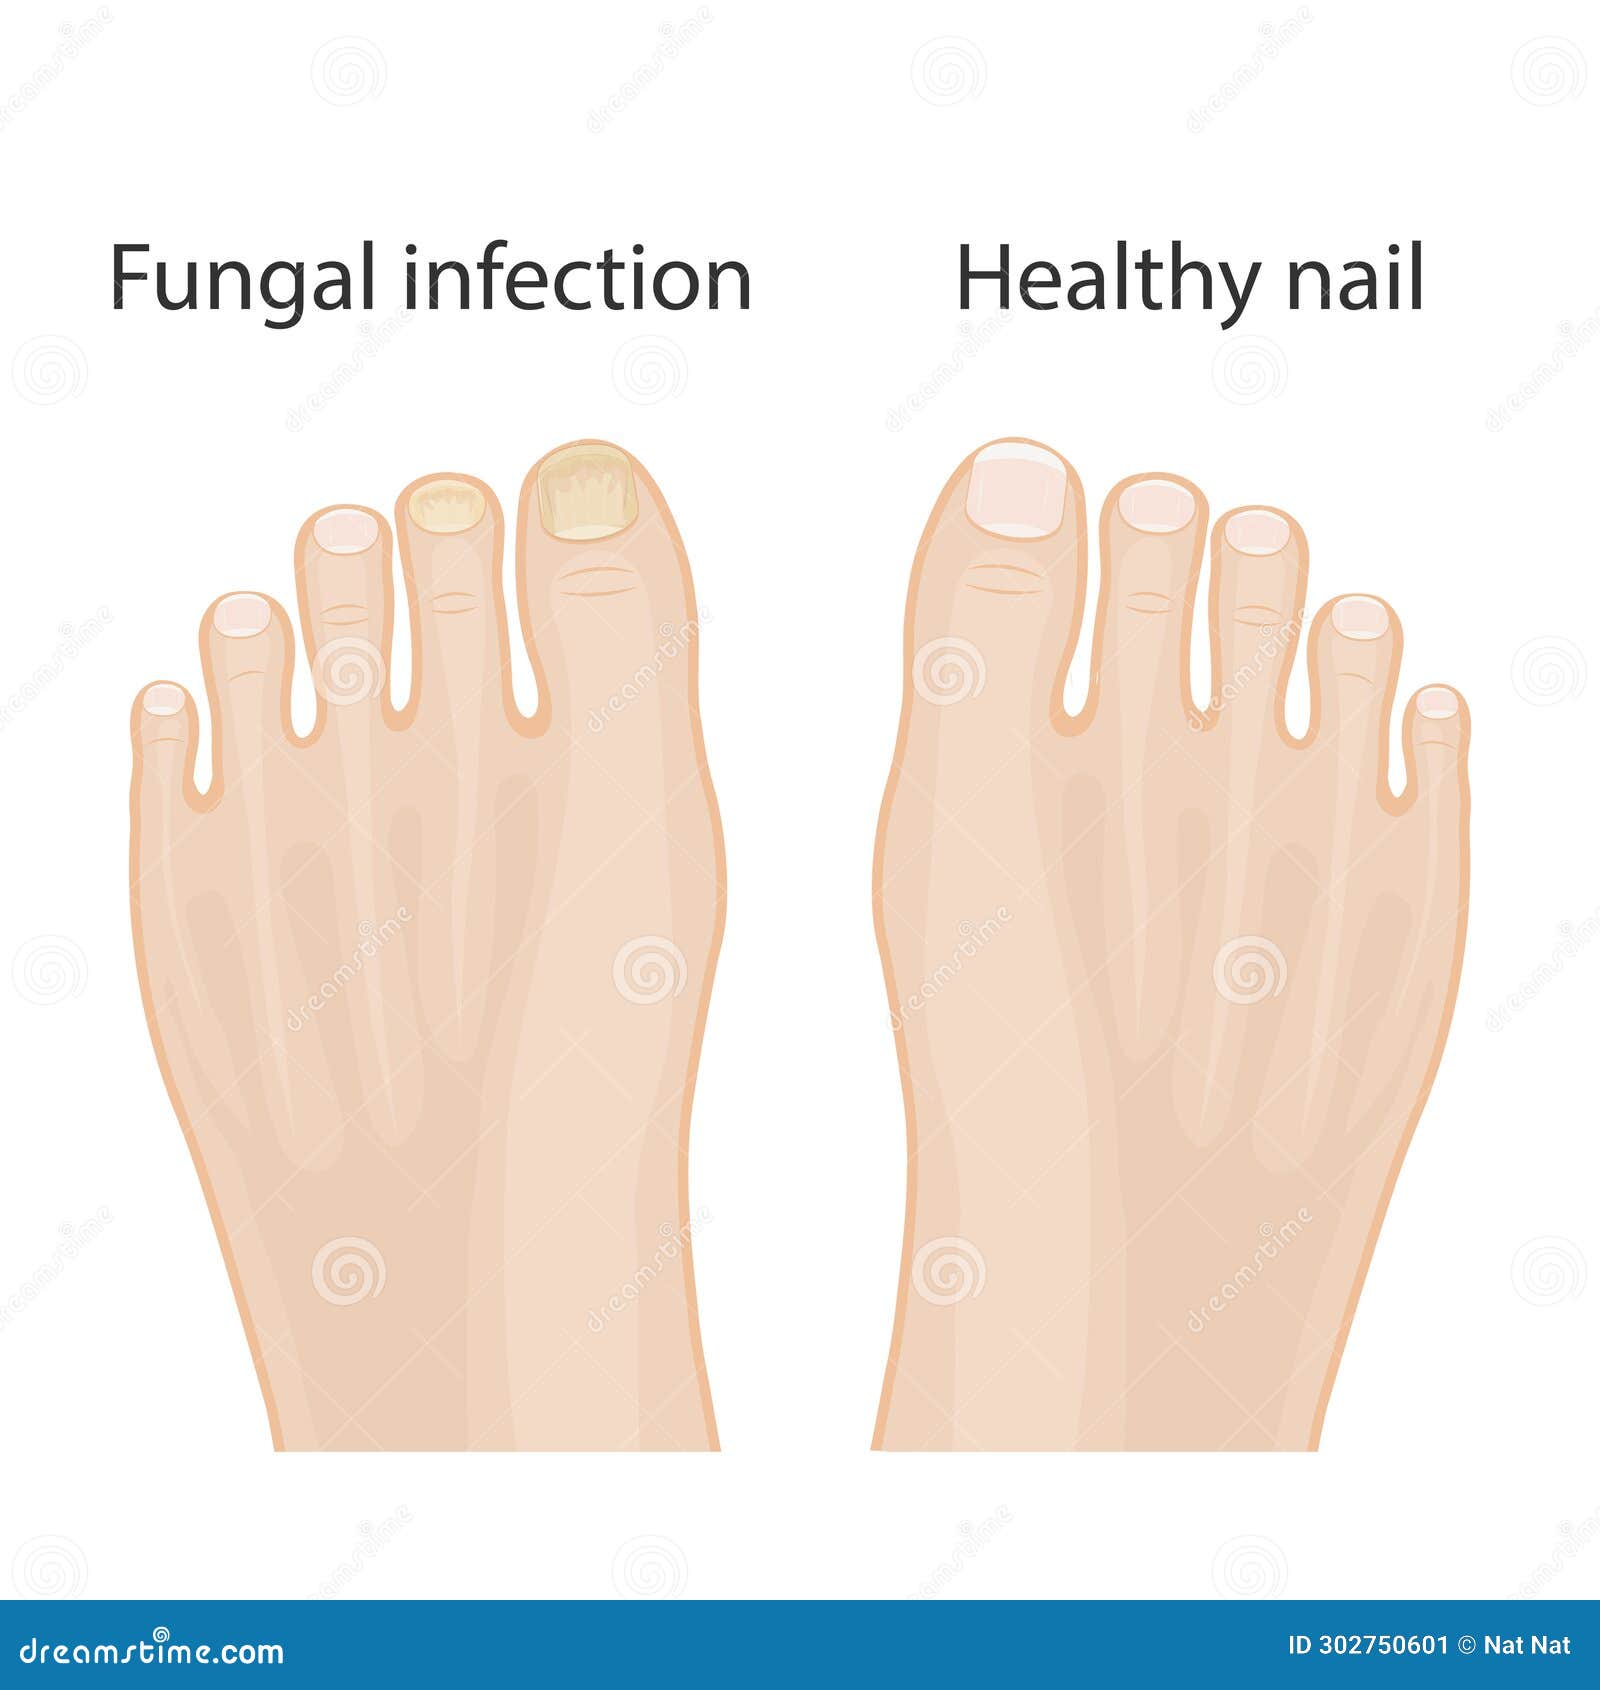 What you need to know about pseudomonas nail infections aka 